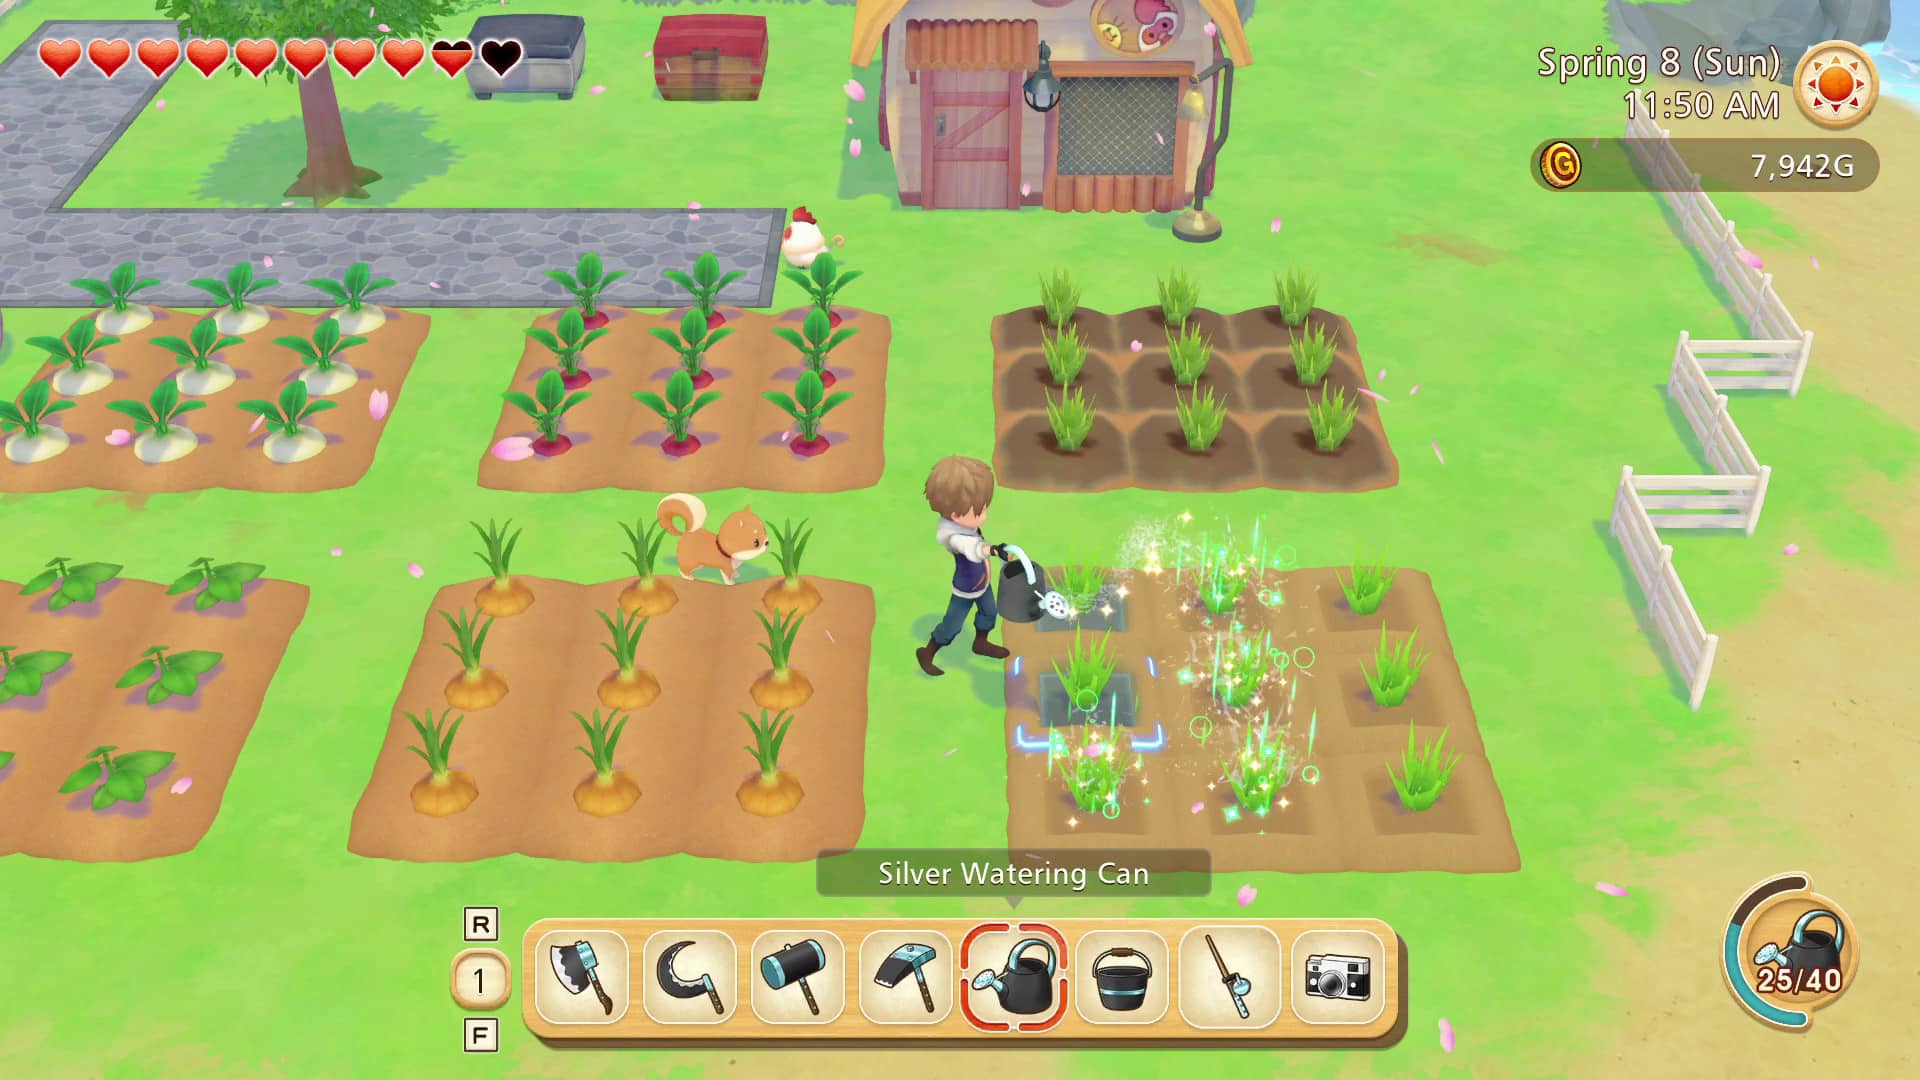 Player character watering the crops followed by pet dog